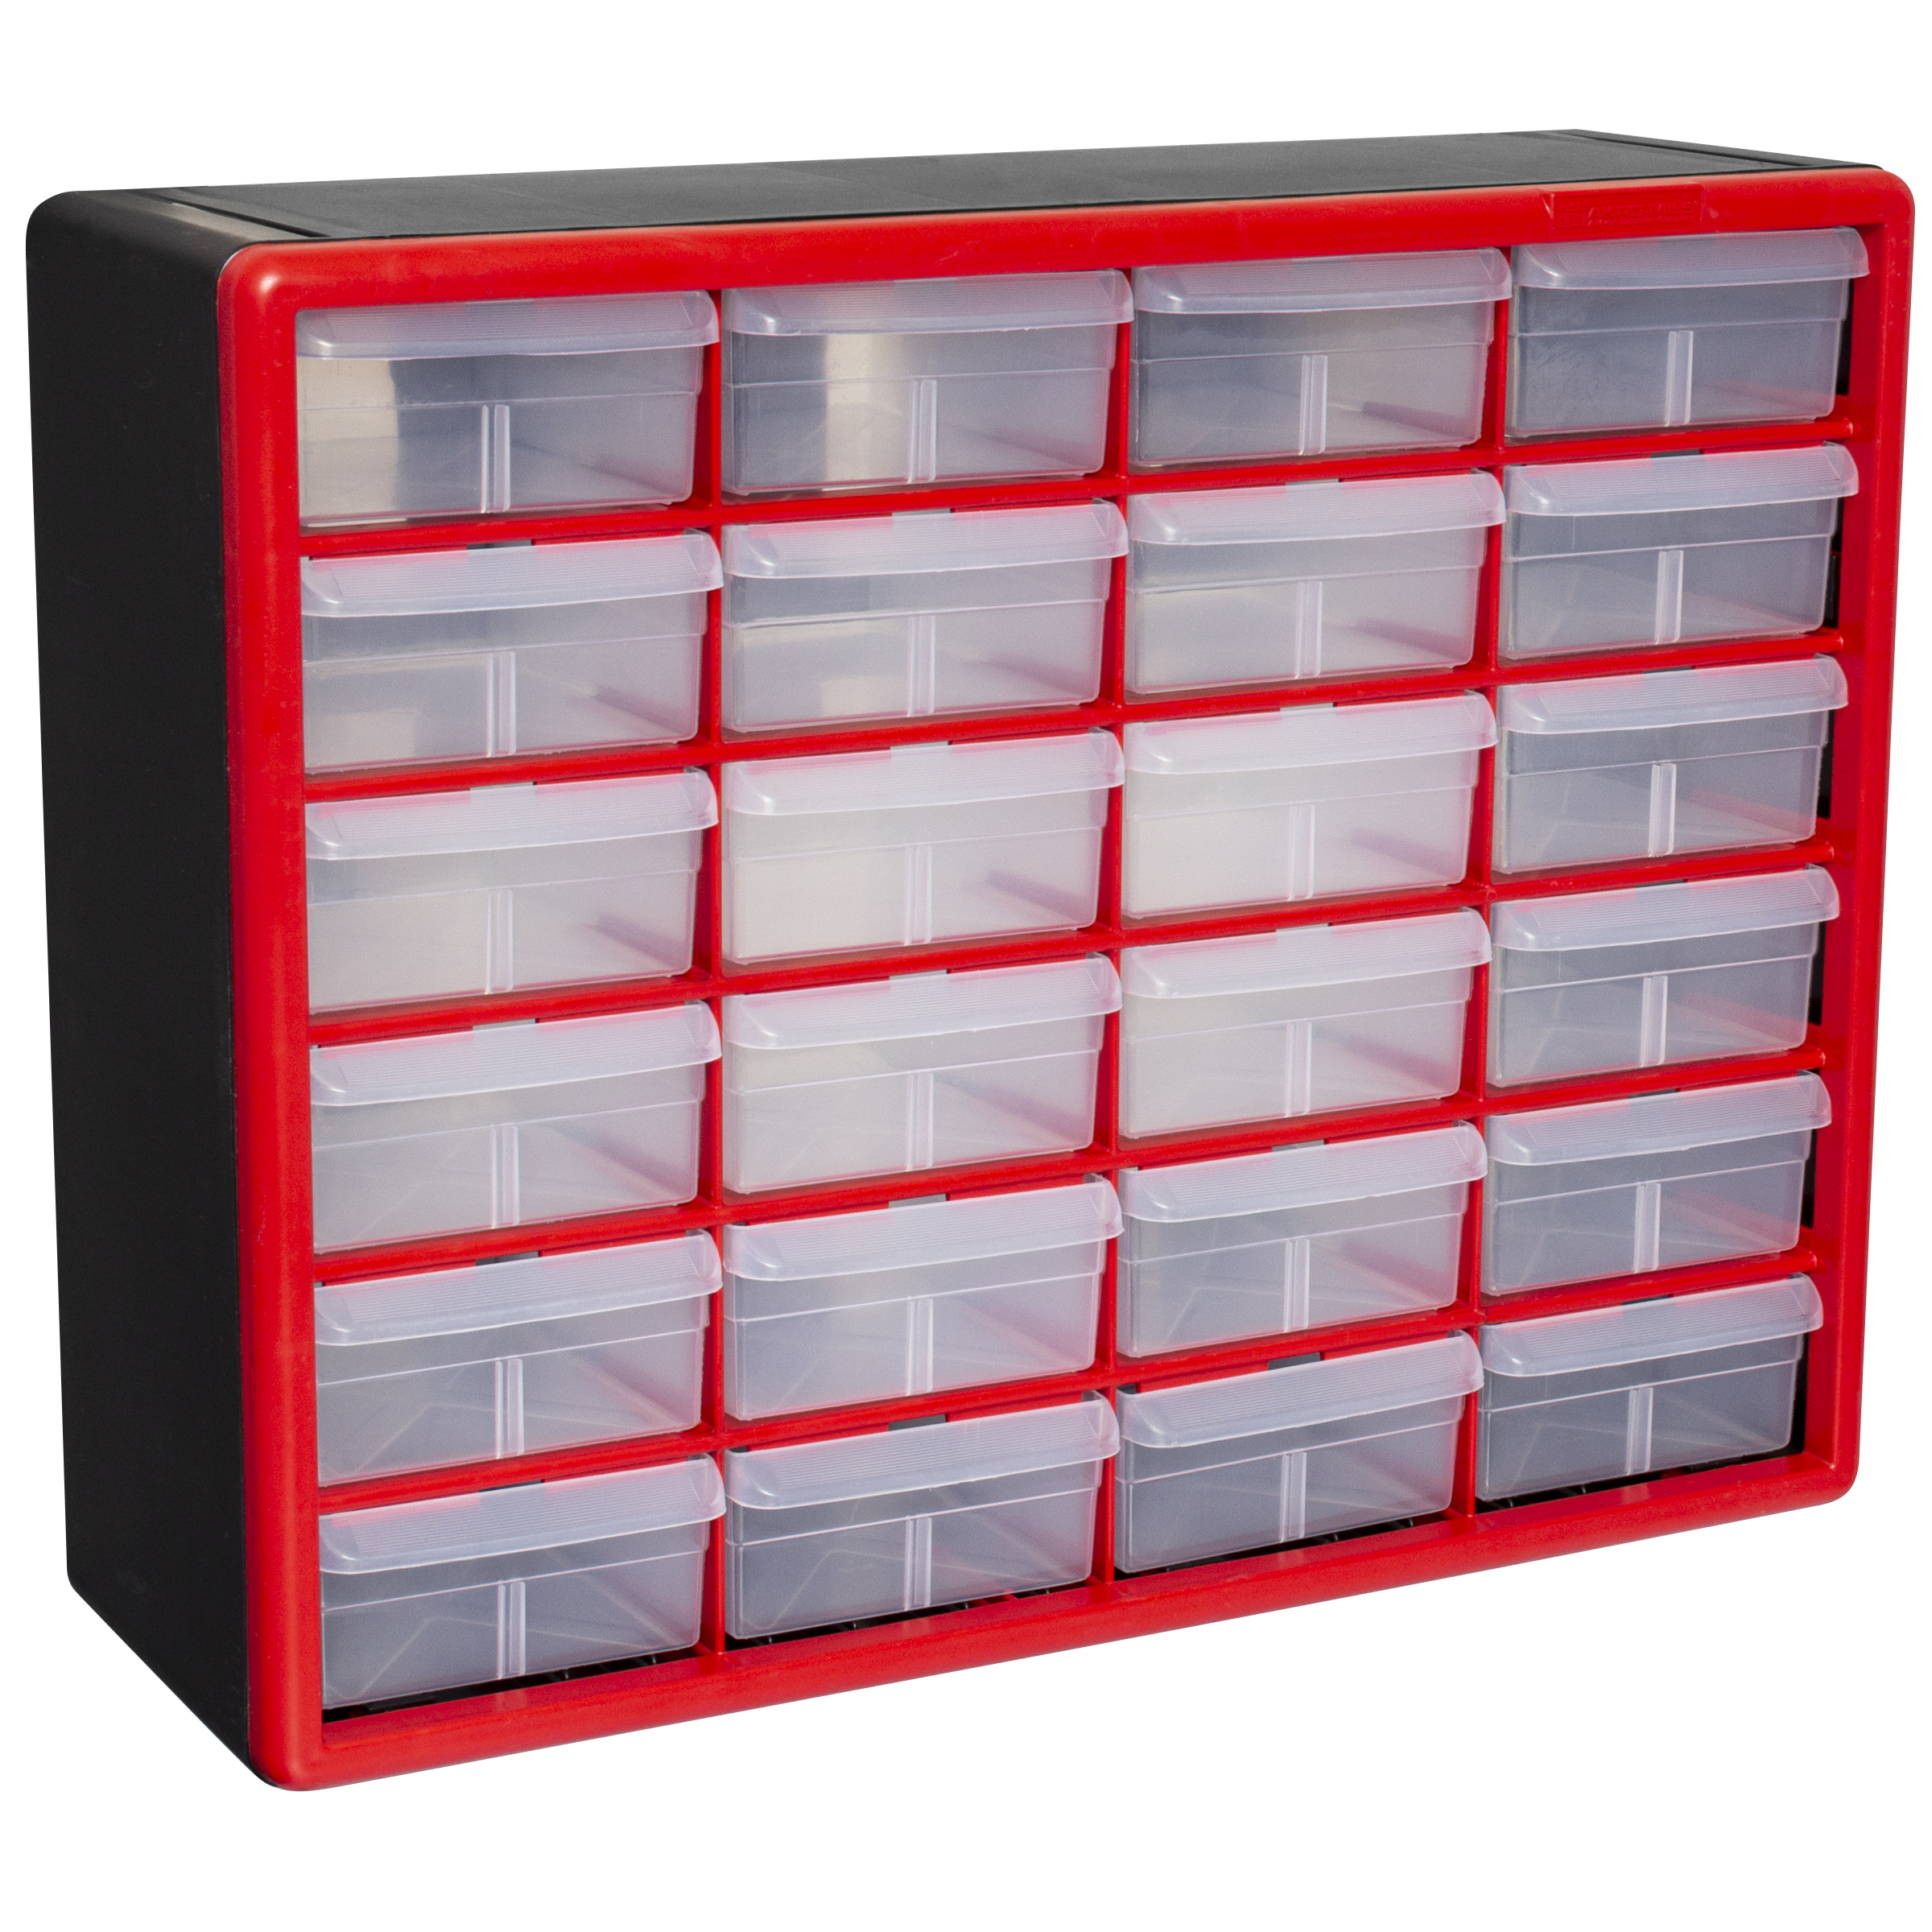 Akro-Mils 24 Drawer Plastic Storage Organizer with Drawers for Hardware,  Small Parts, Craft Supplies, Red 